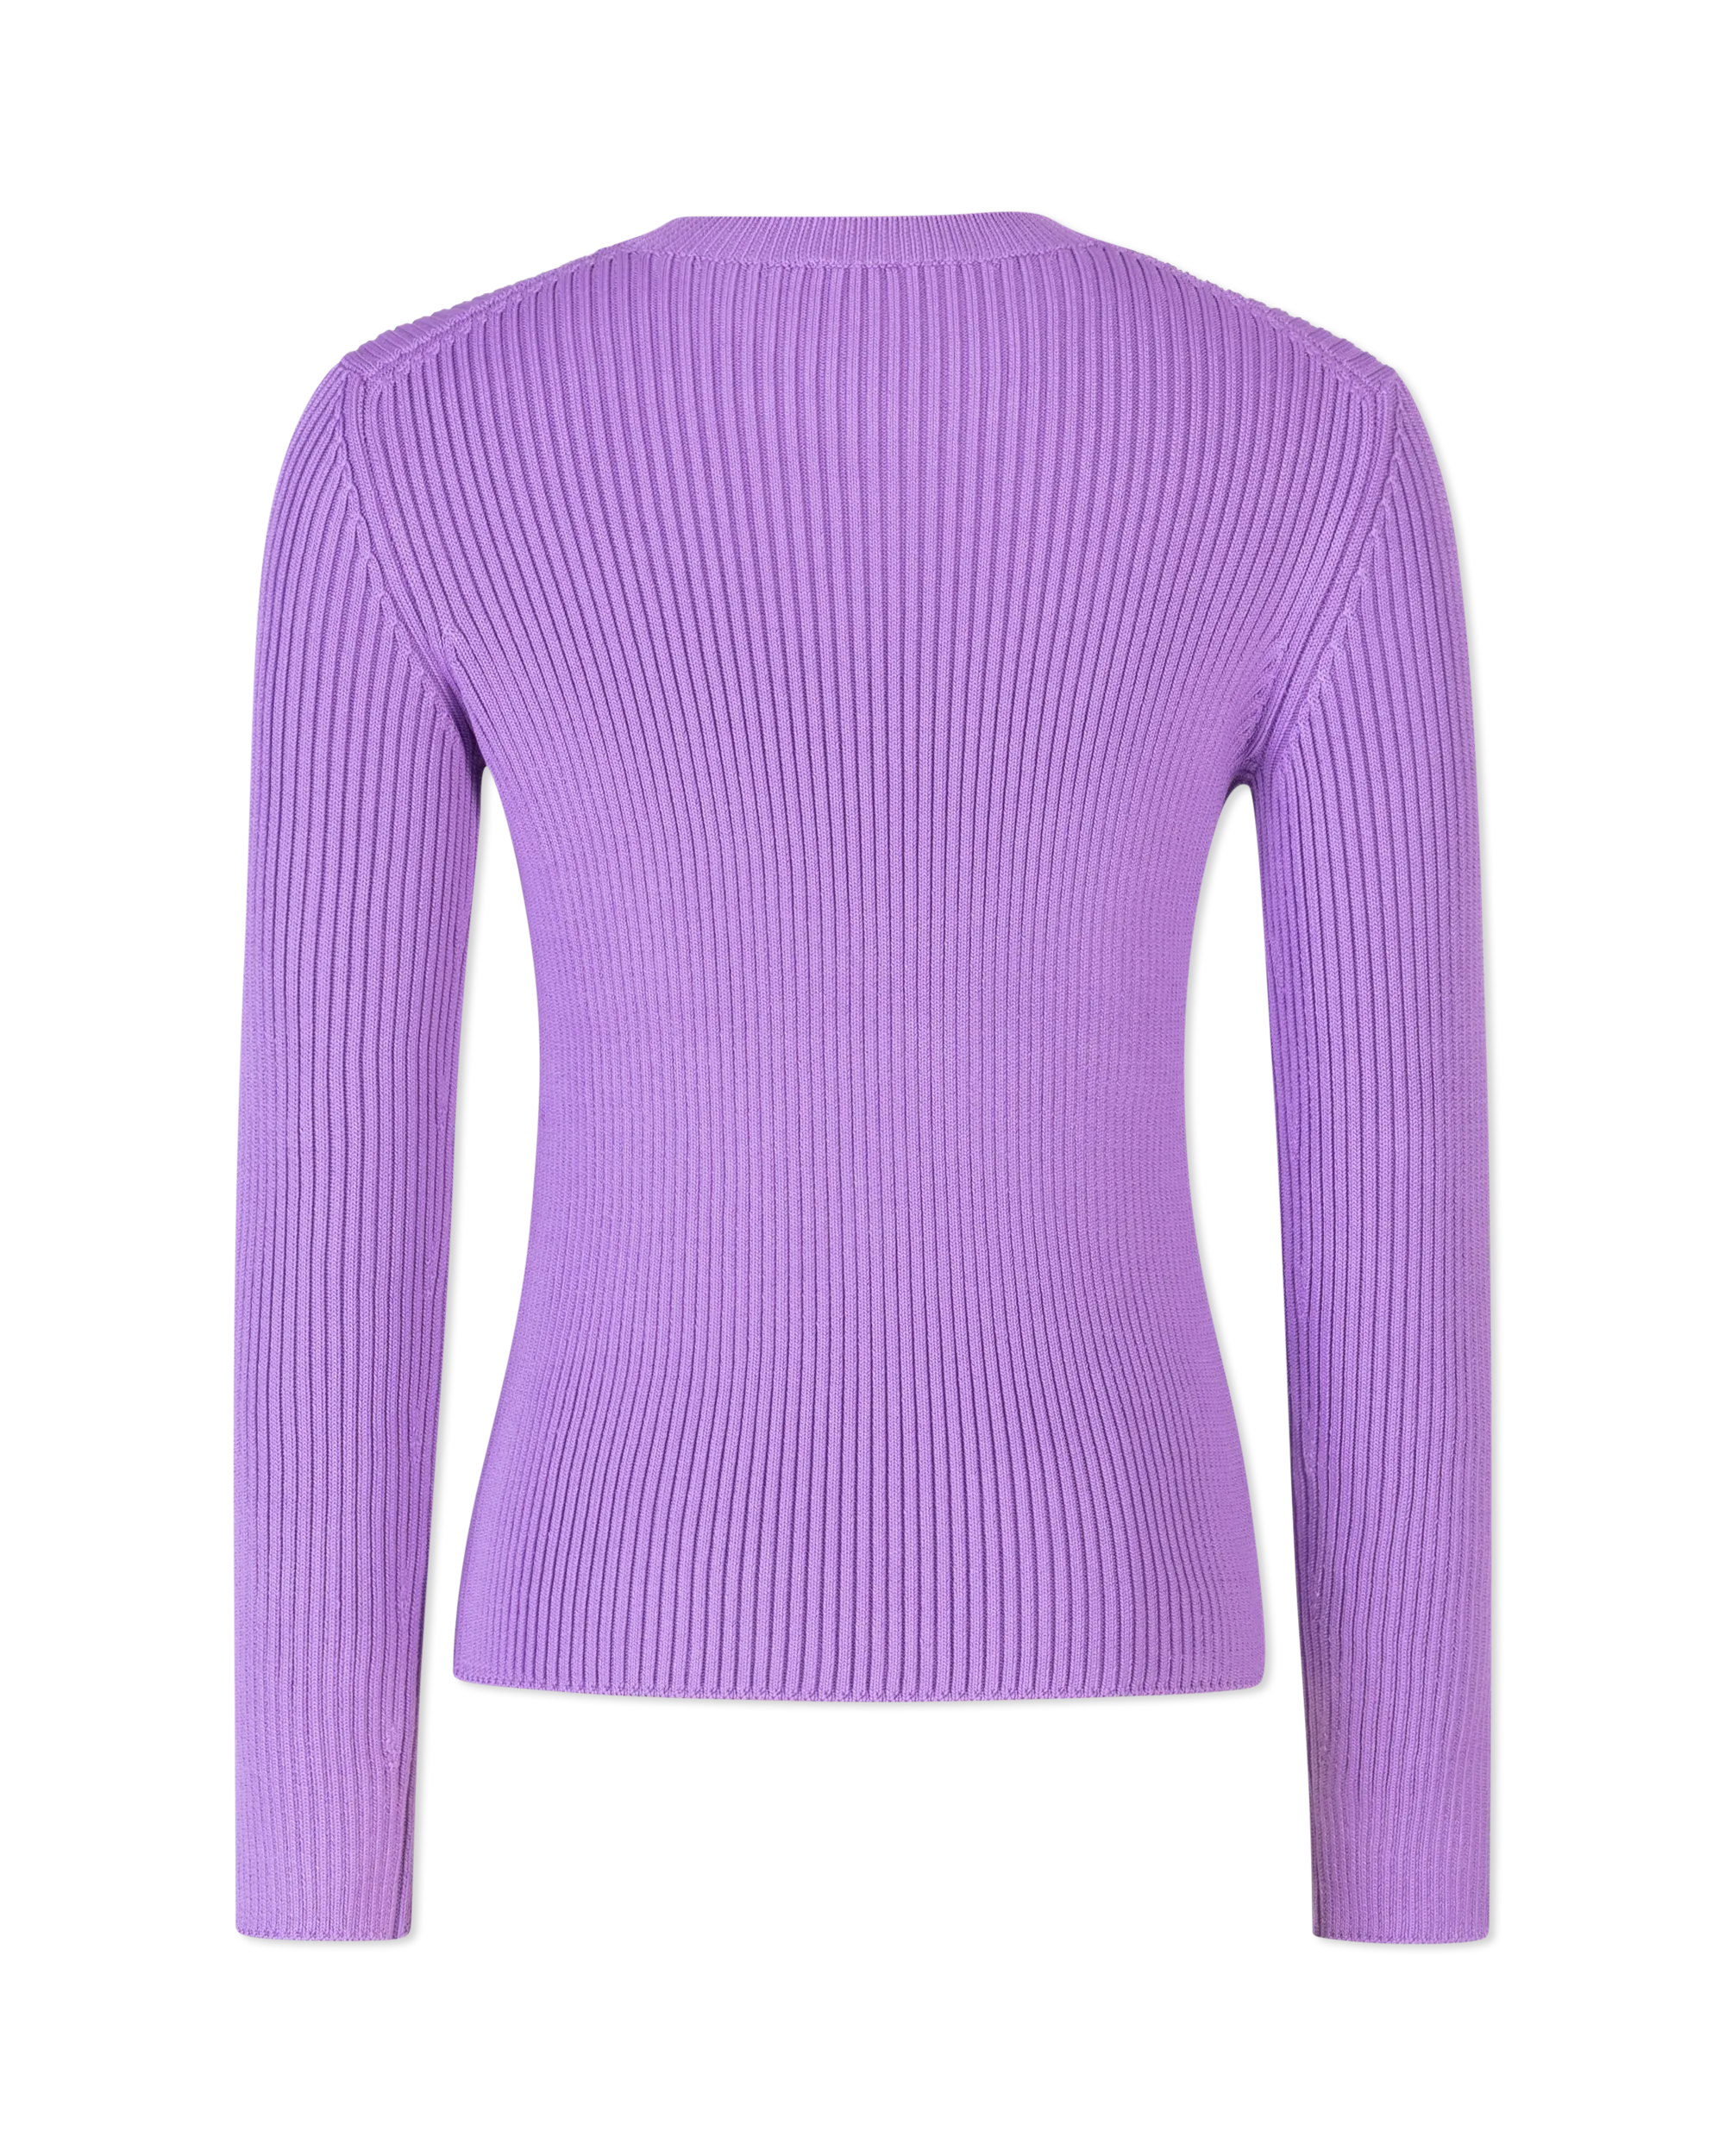 Ribbed Knit Long Sleeve Sweater